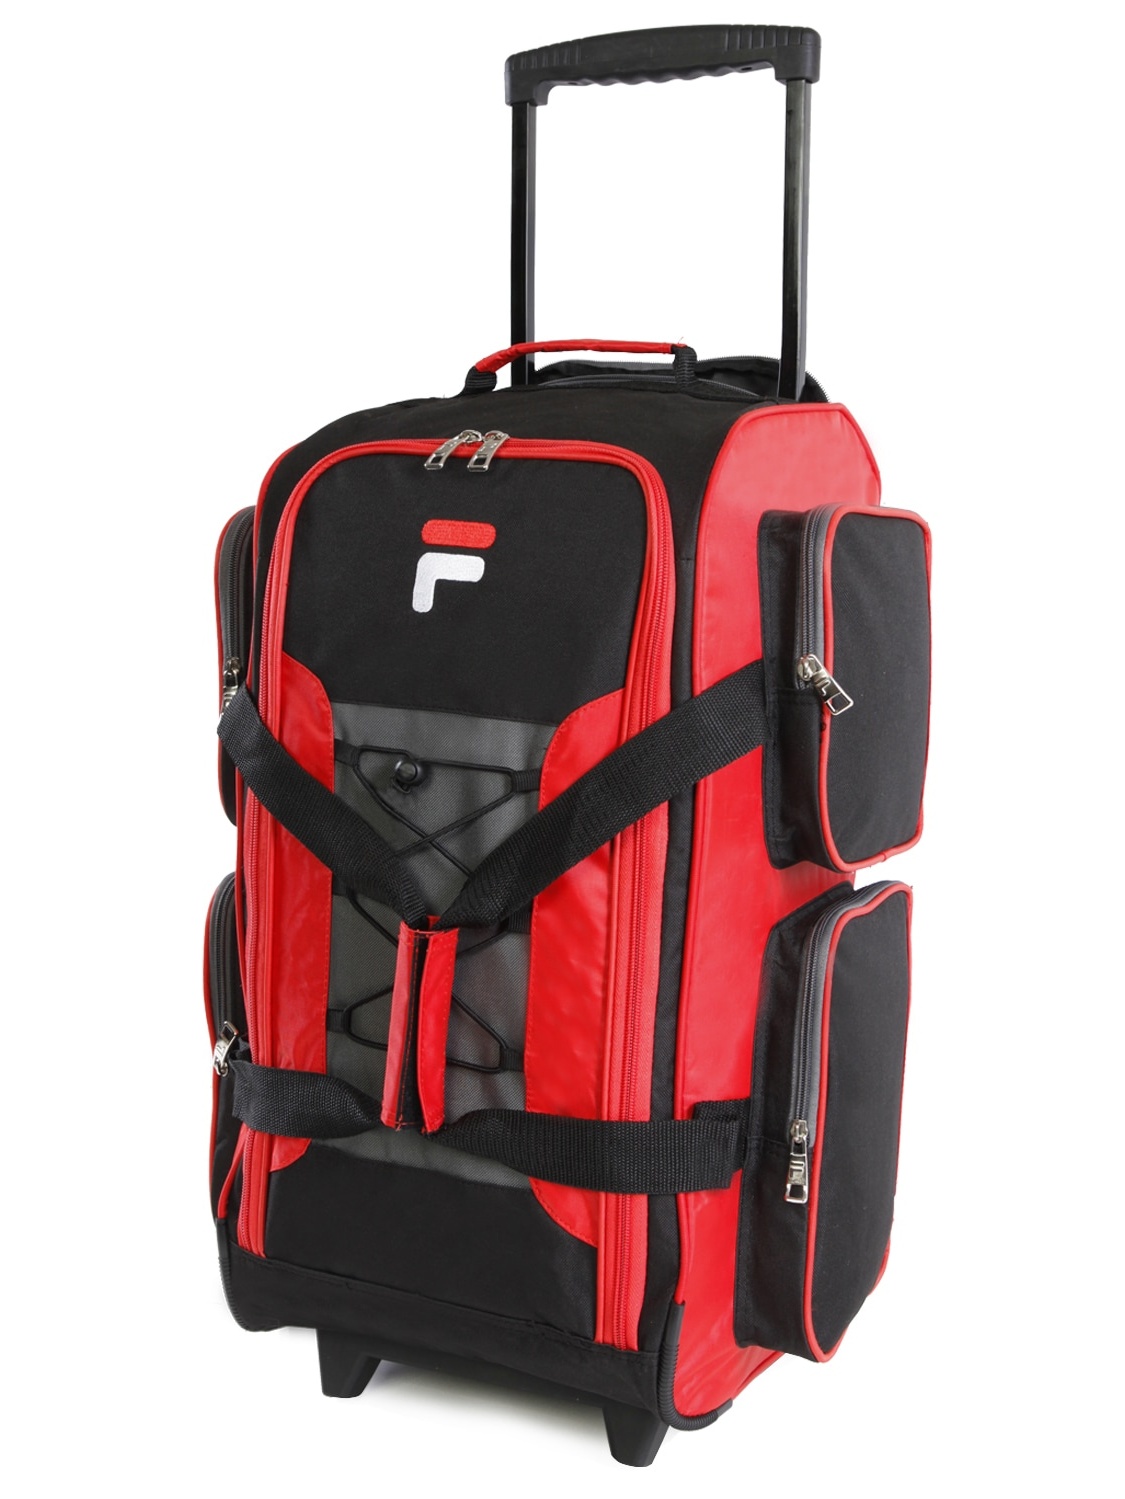 22-inch Lightweight Carry-on Rolling Duffel Bag - image 5 of 5